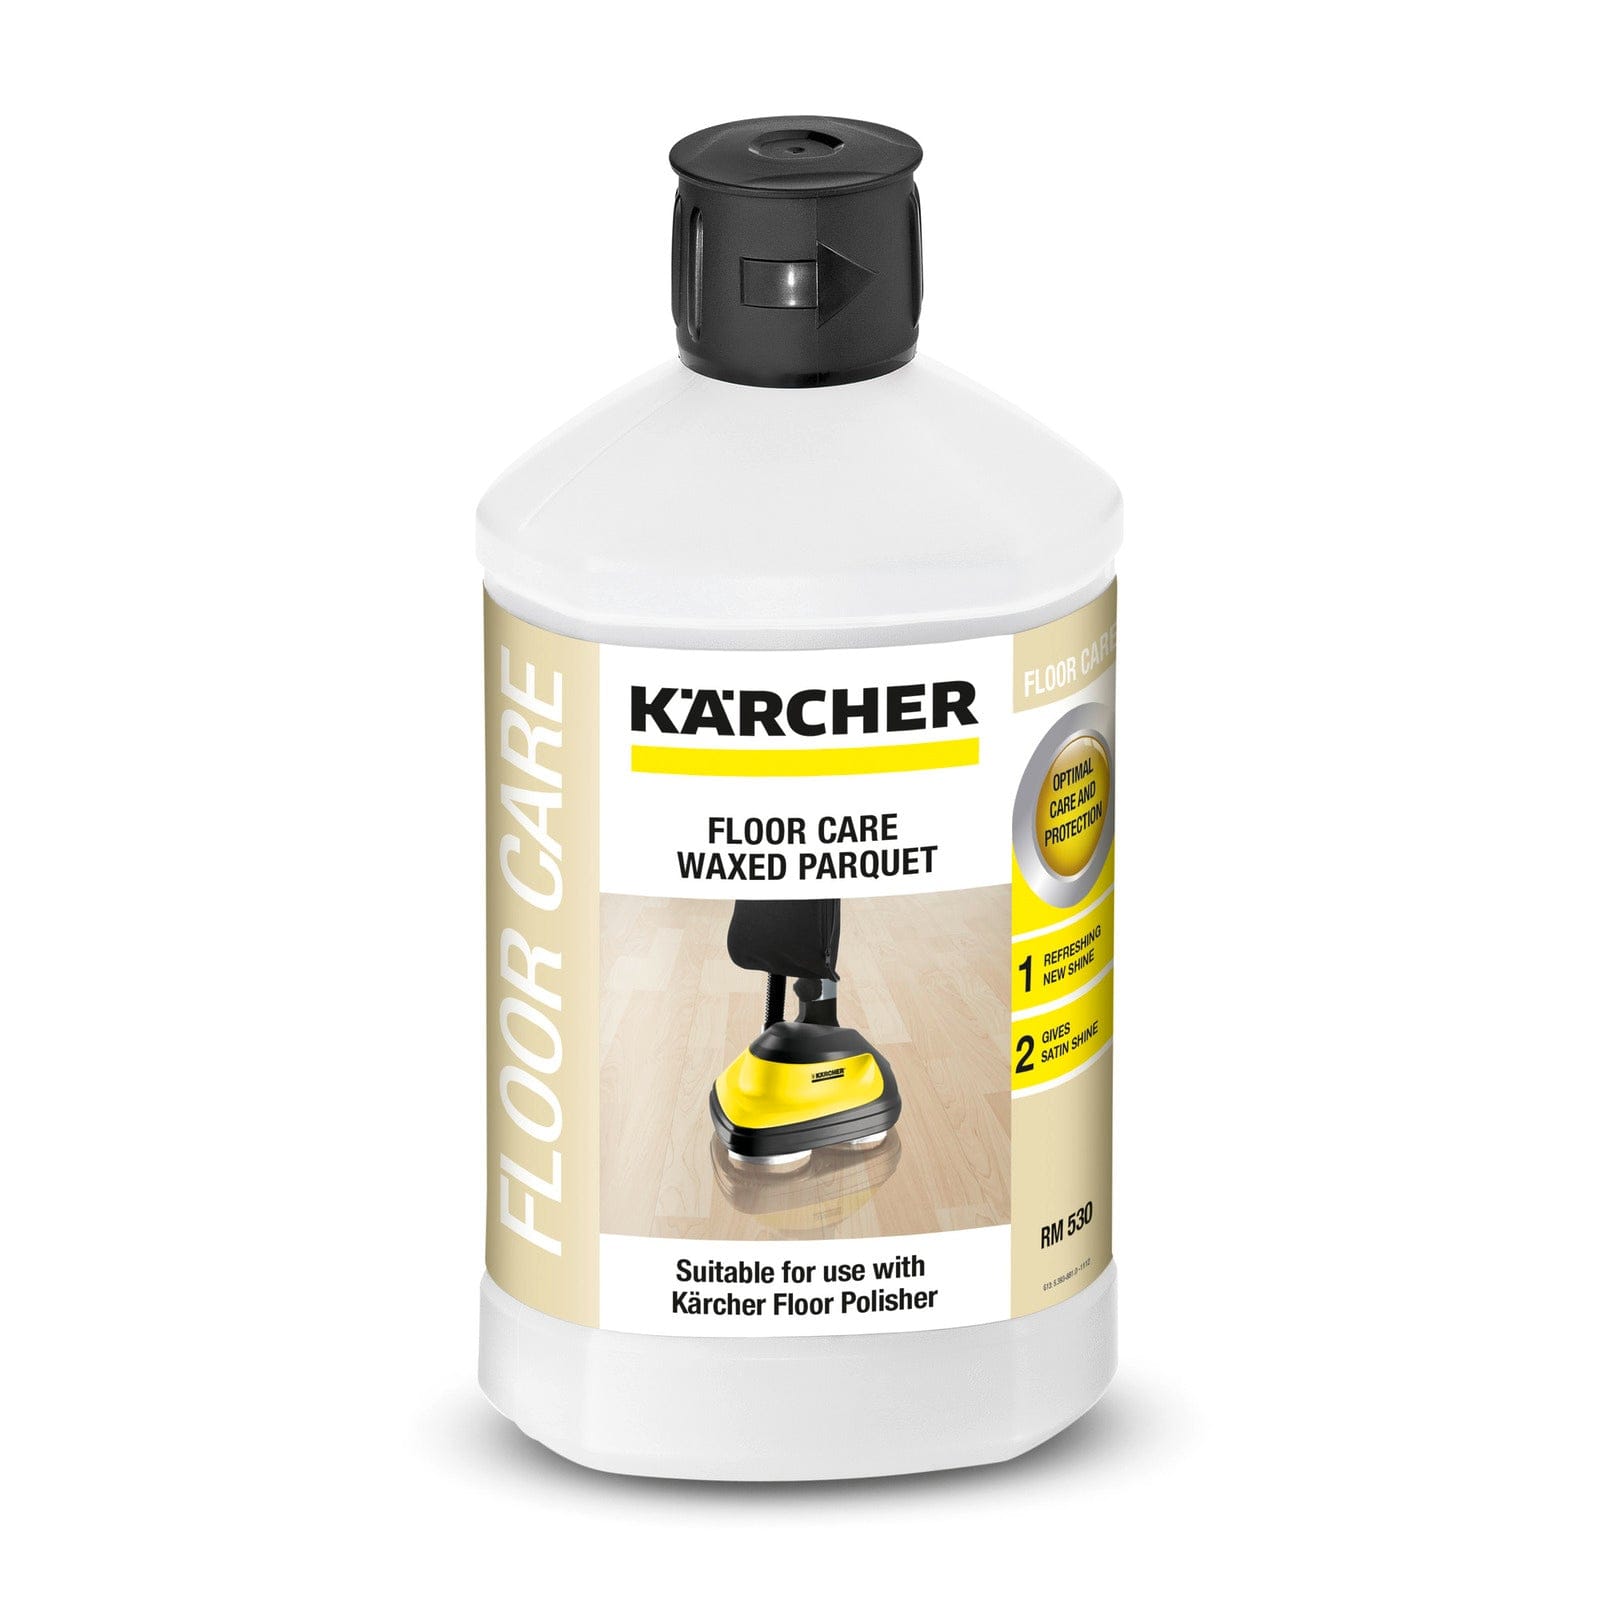 Karcher Universal Cleaner RM 626, 1L | Supply Master | Accra, Ghana Cleaning Equipment Accessories Buy Tools hardware Building materials